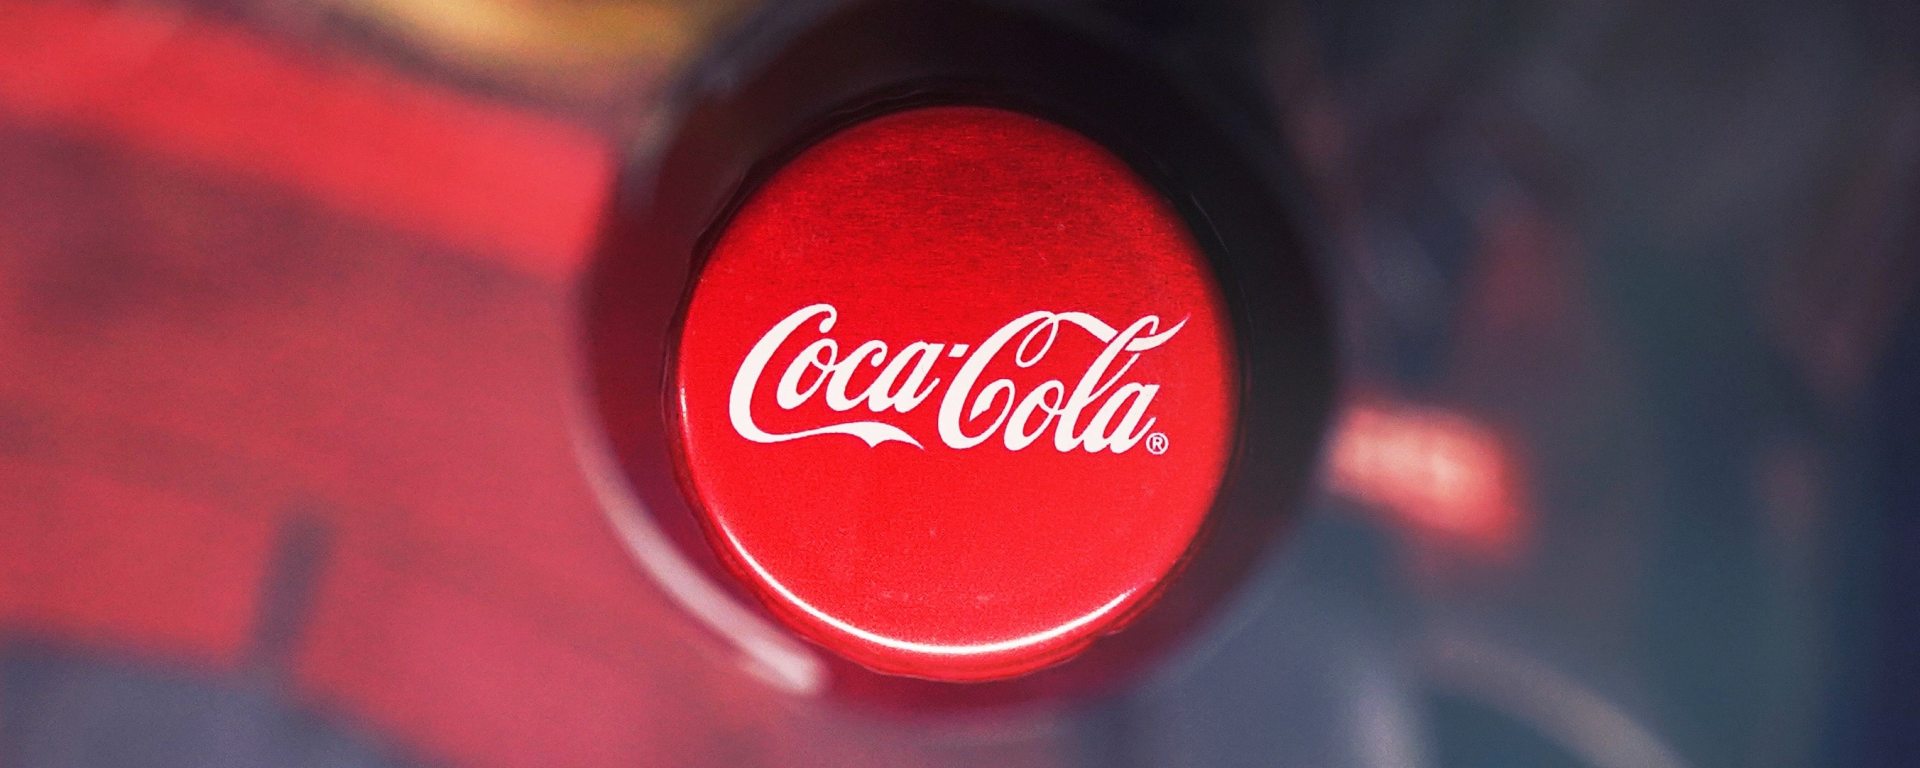 aerial view of a coca cola bottle